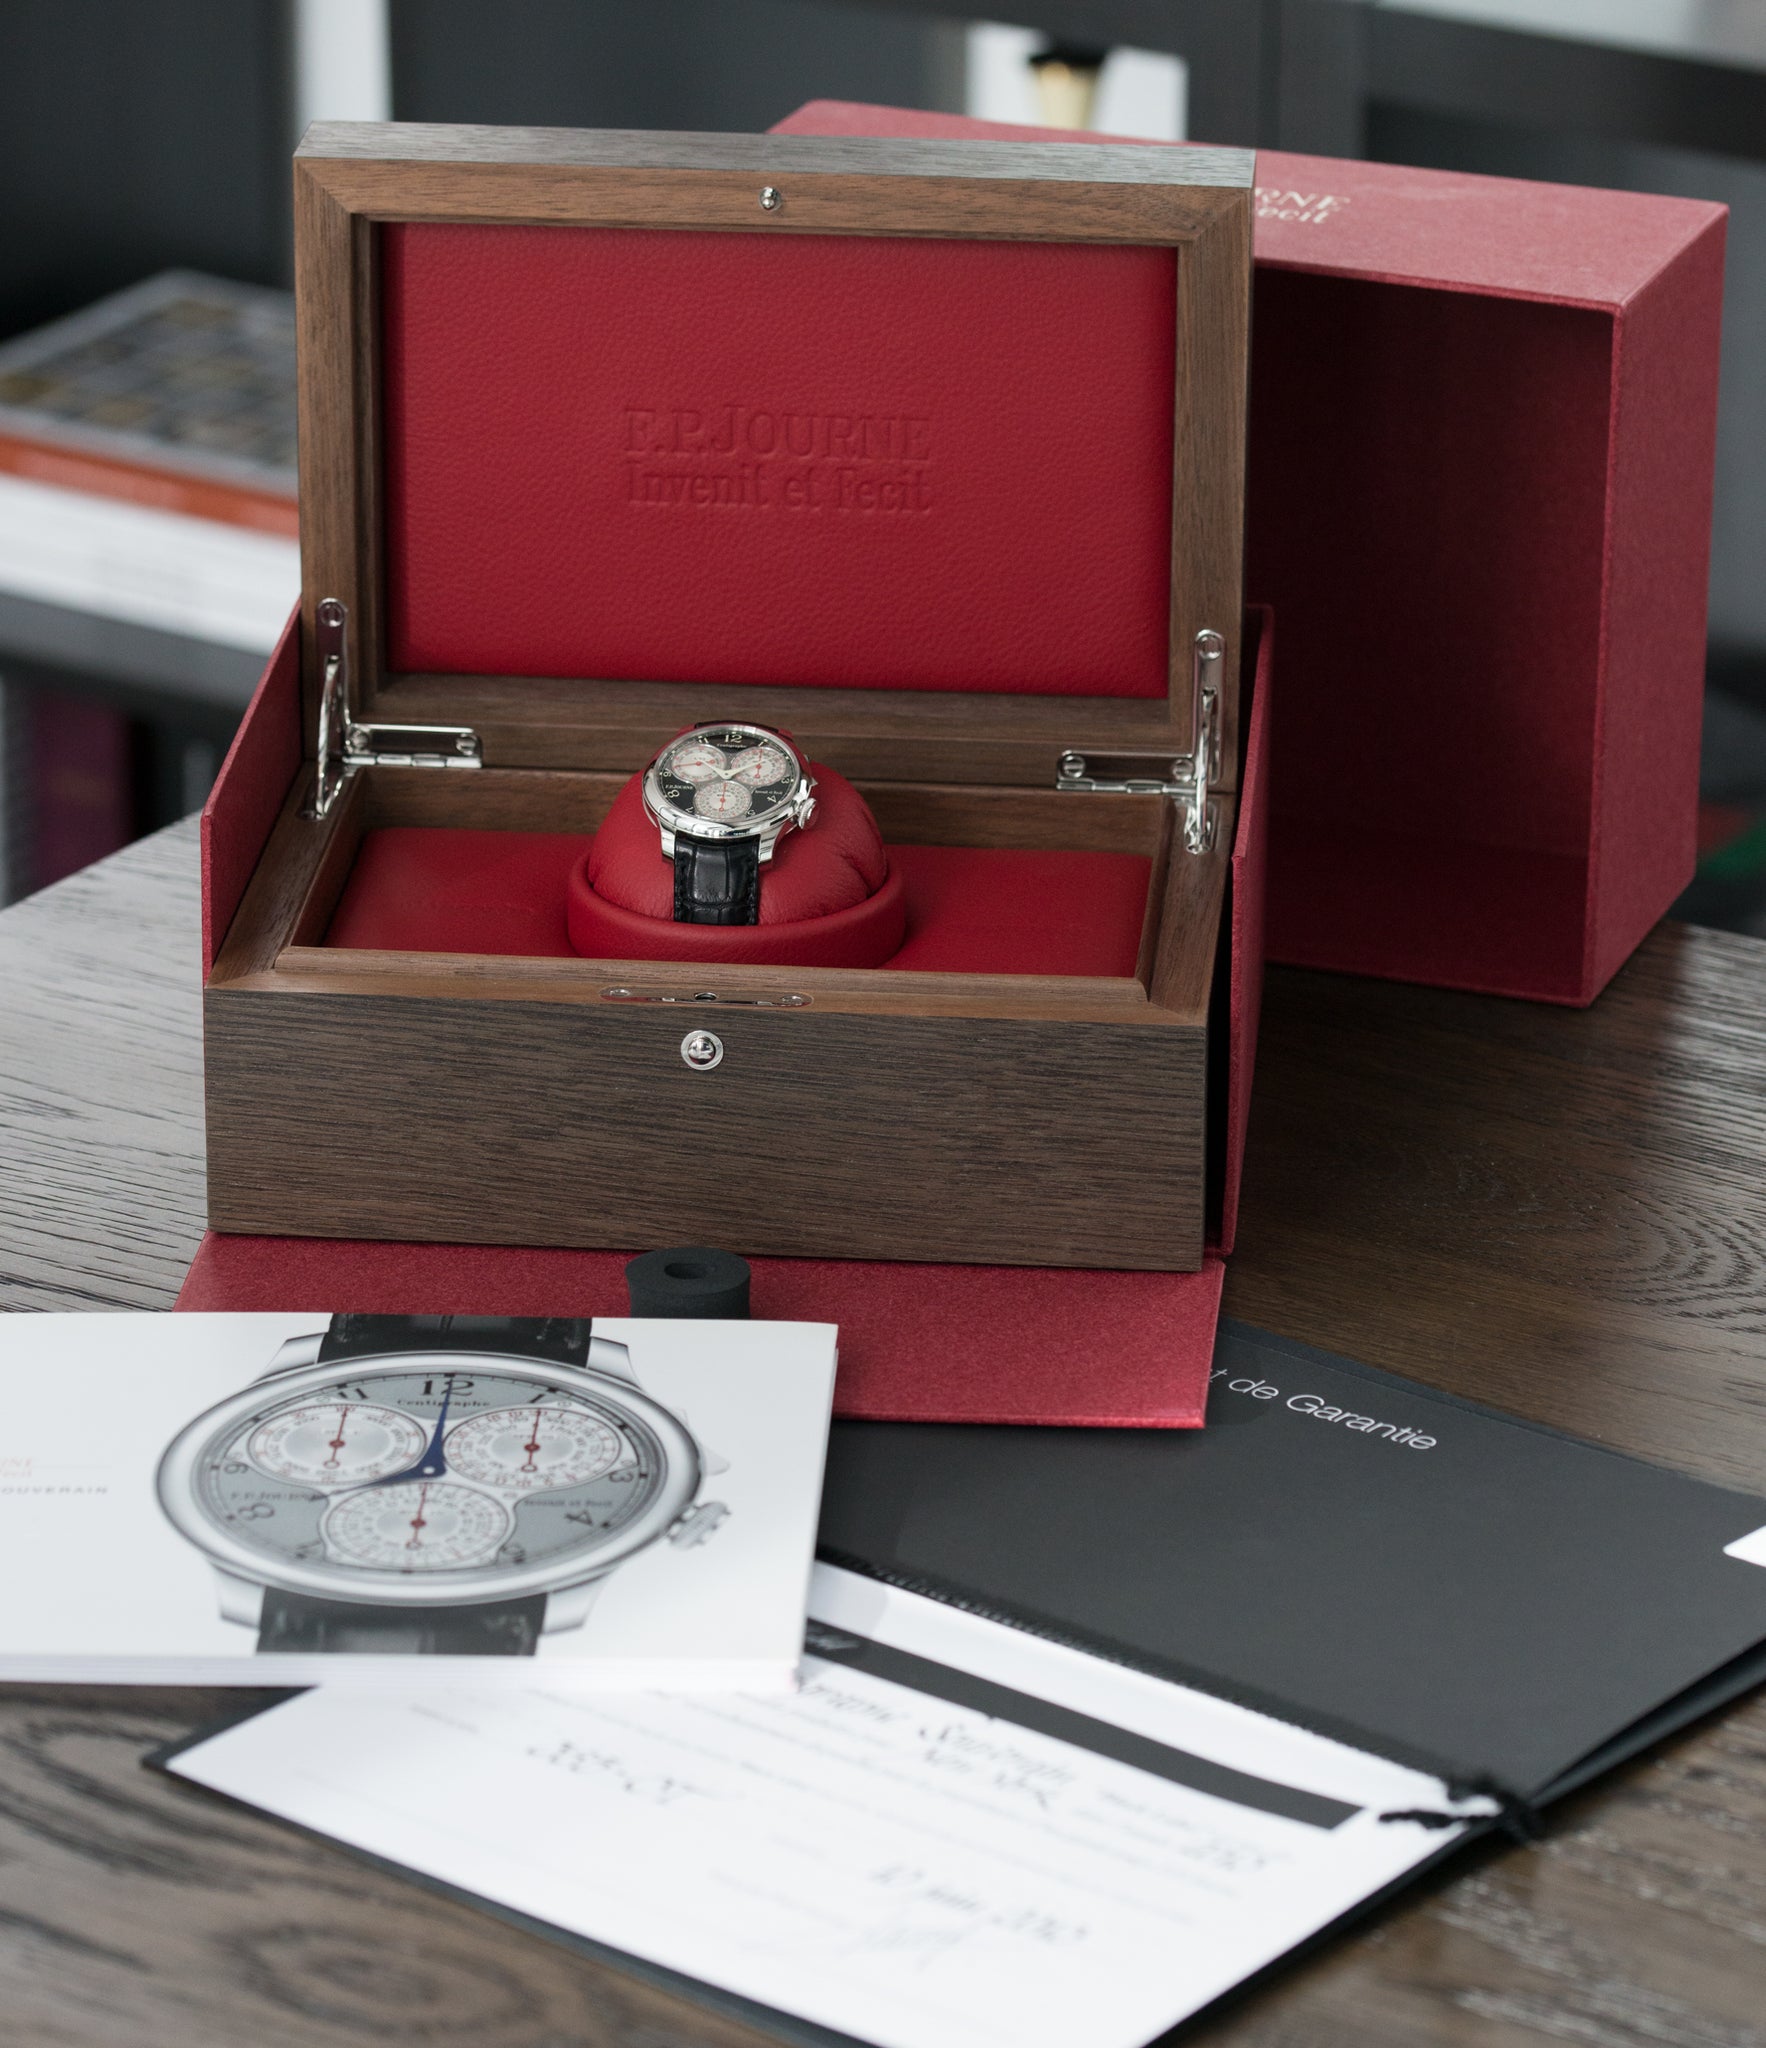 full set F. P. Journe Centigraphe Souverain Black Label 40 mm platinum pre-owned rare watch for sale online at A Collected Man London approved retailer of independent watchmakers